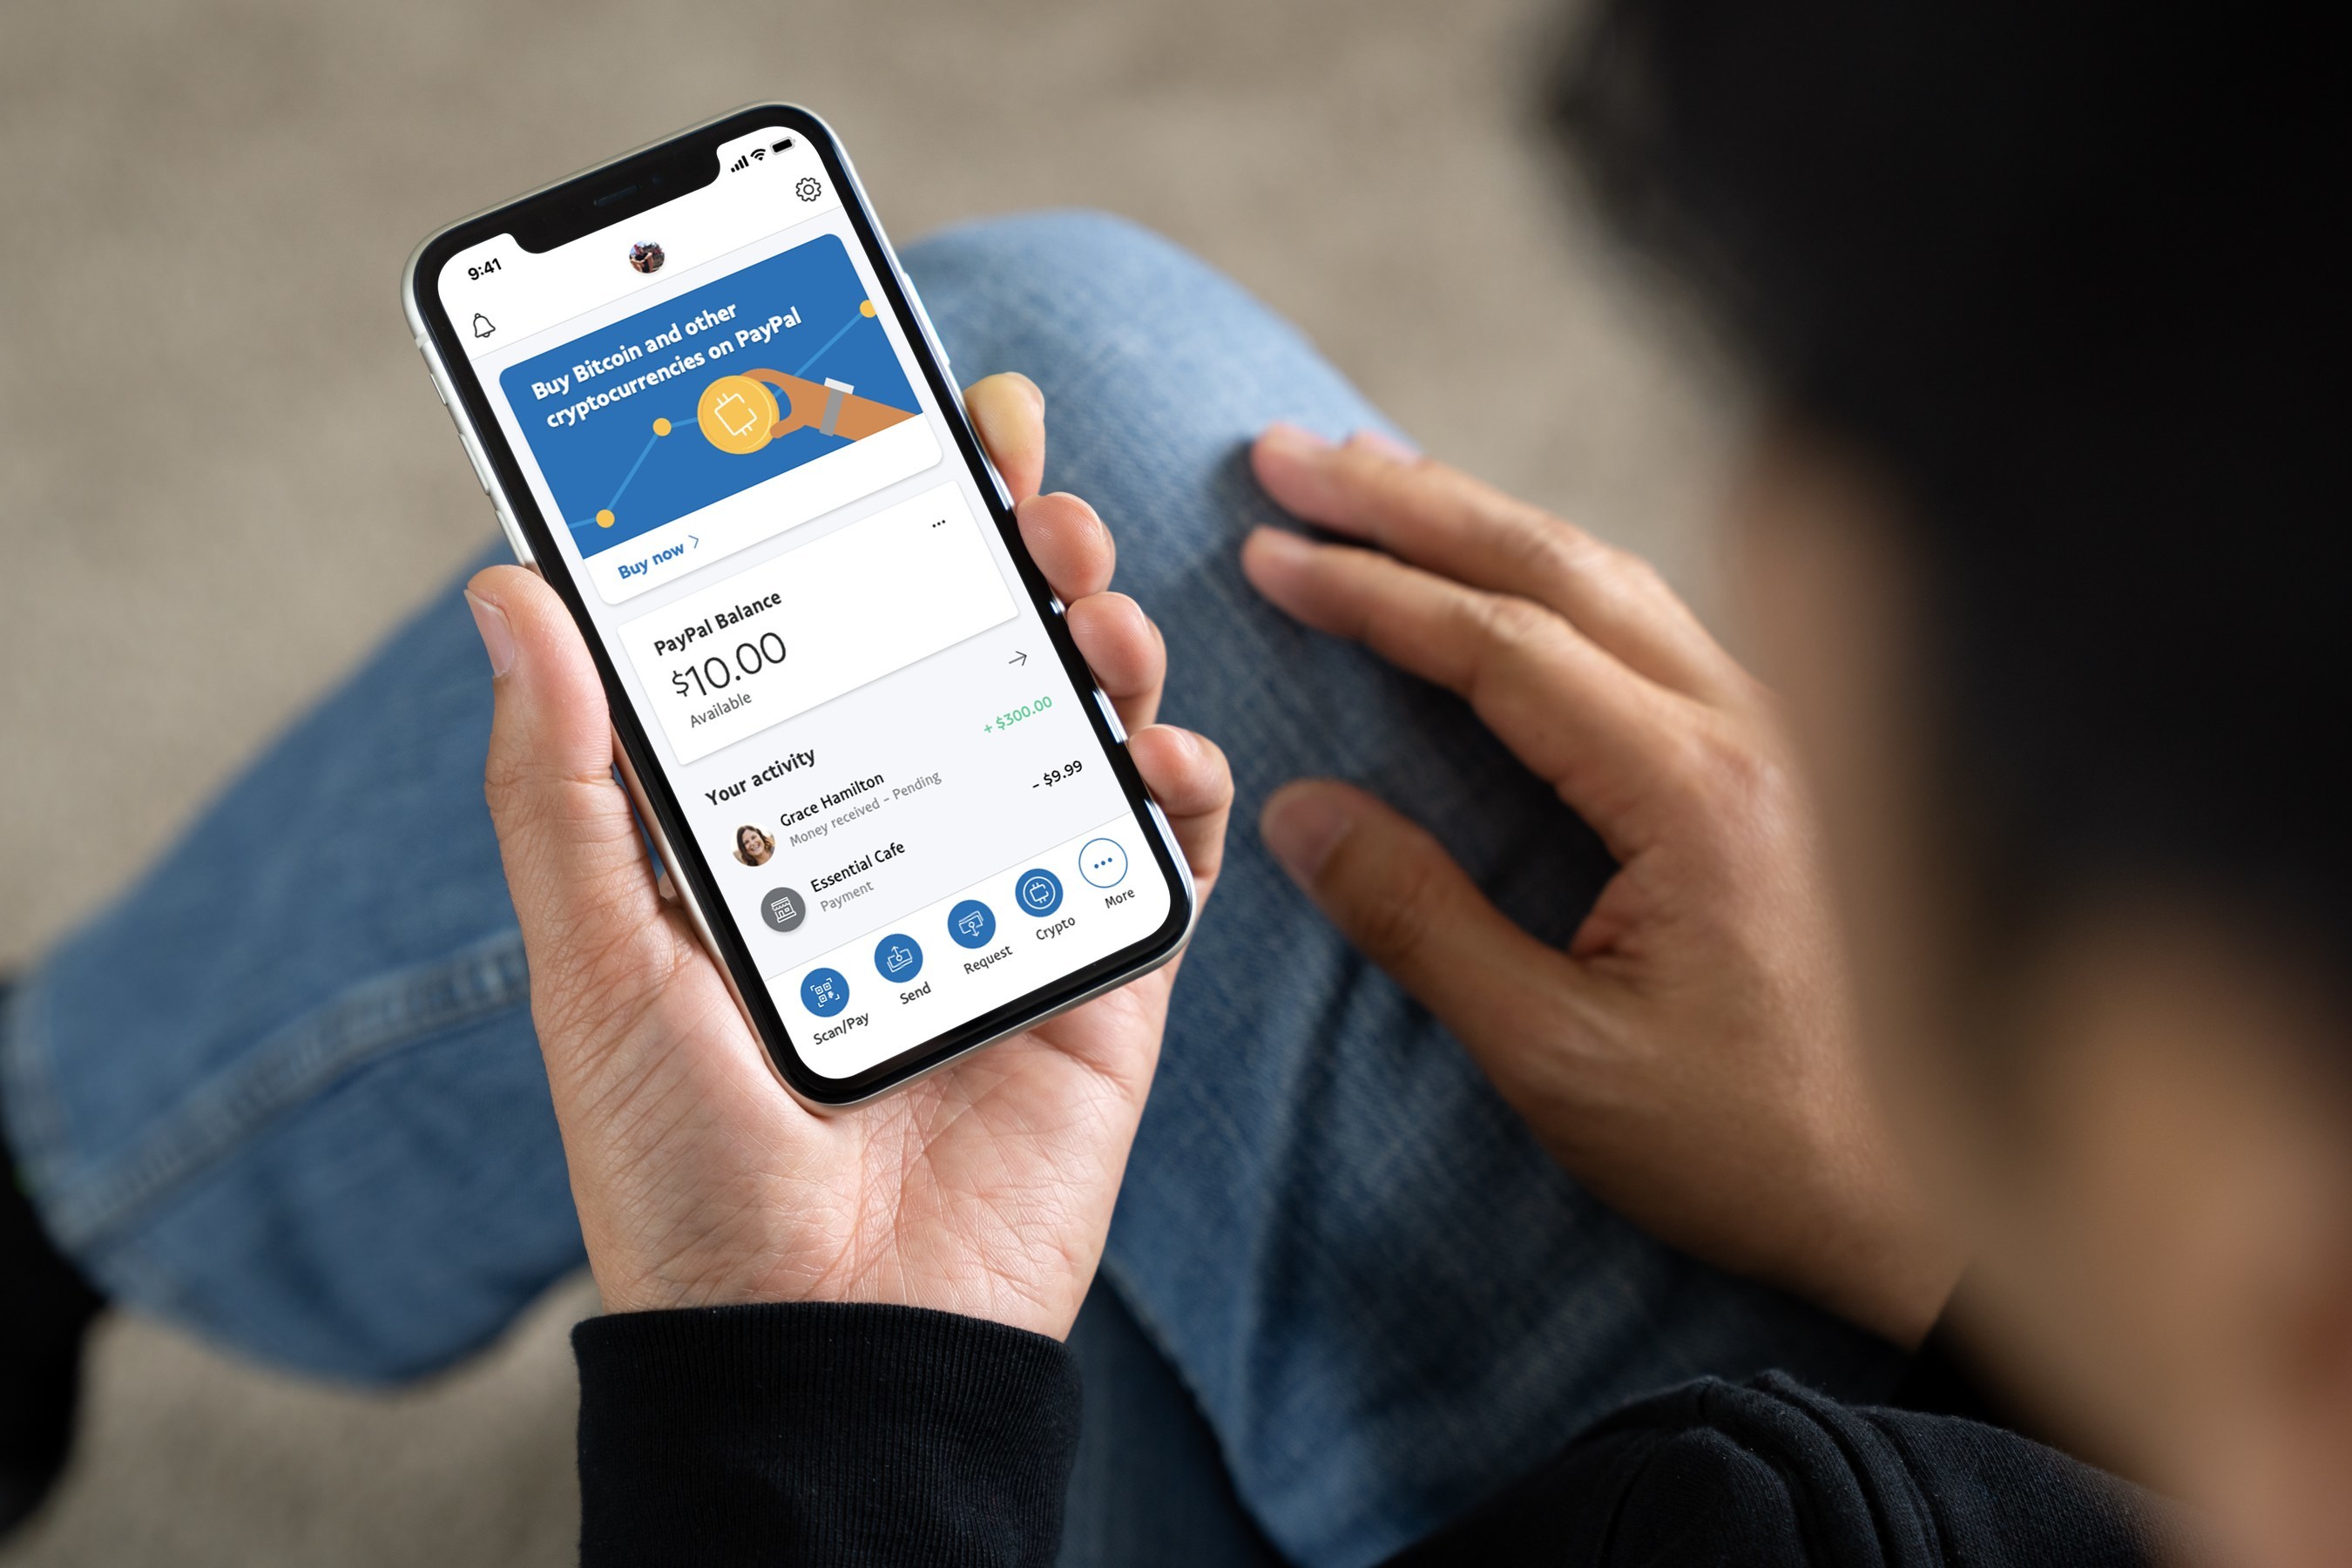 Press Release Paypal Launches New Service Enabling Users To Buy Hold And Sell Cryptocurrency Oct 21 2020